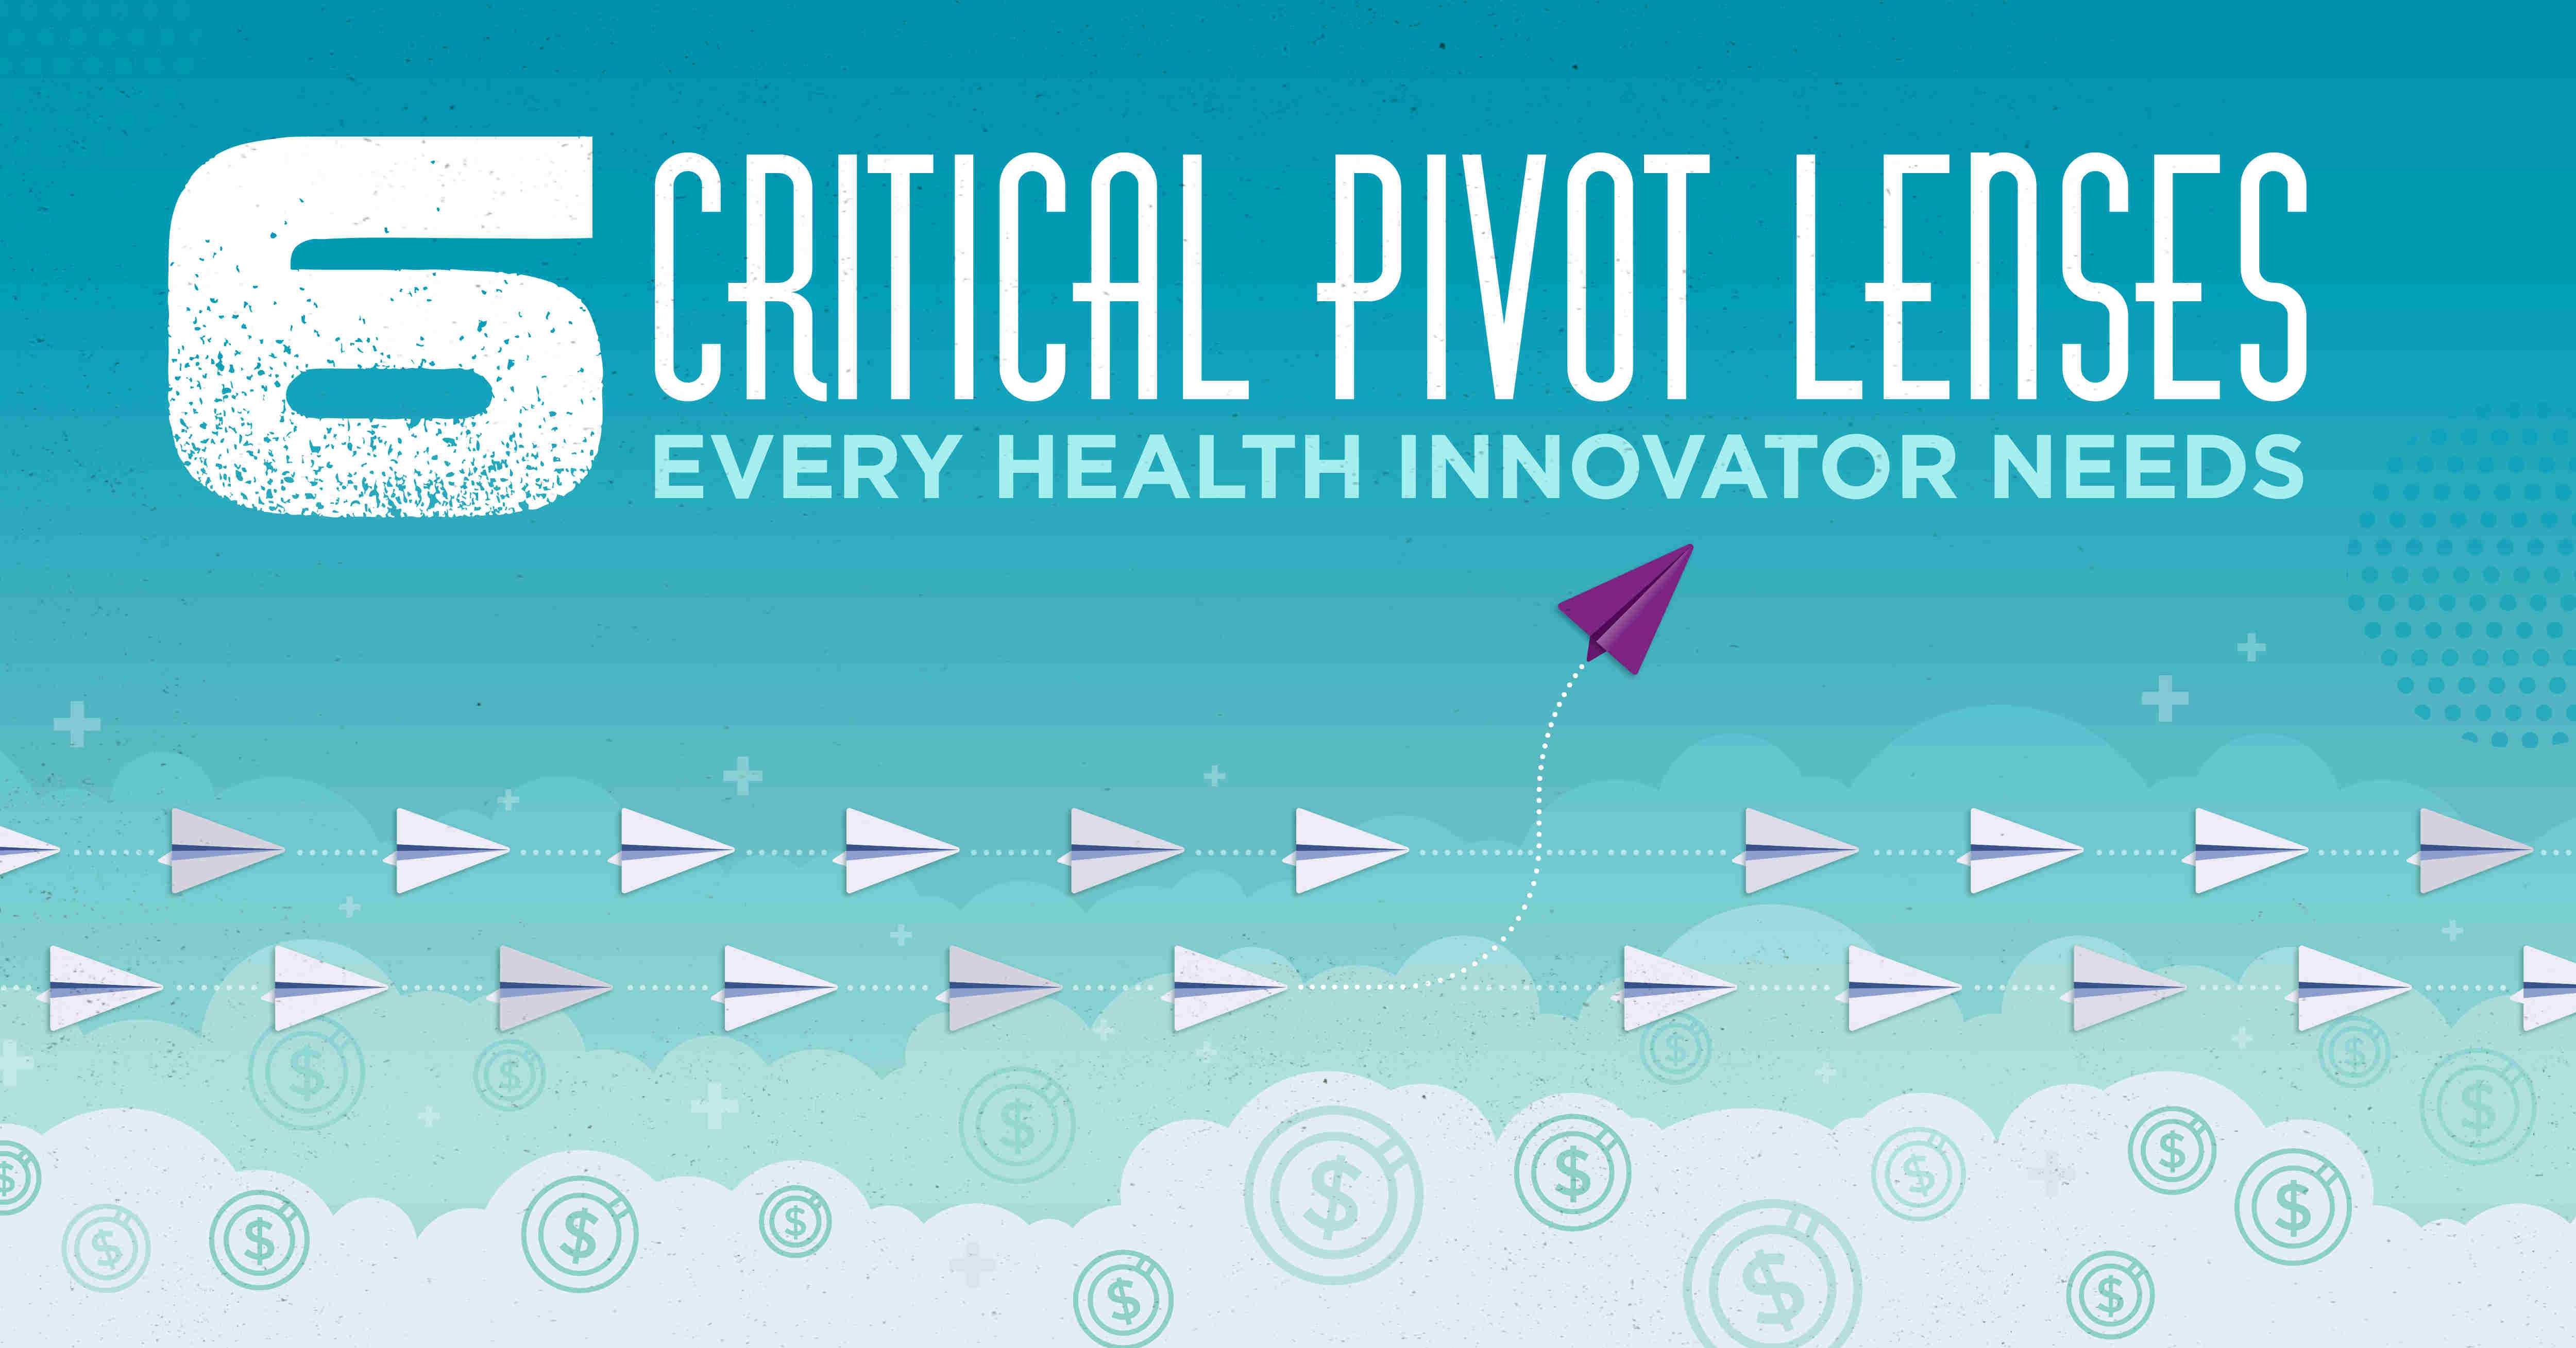 Health innovators: Turn this crisis into your success! 6 critical pivot lenses you need to look through